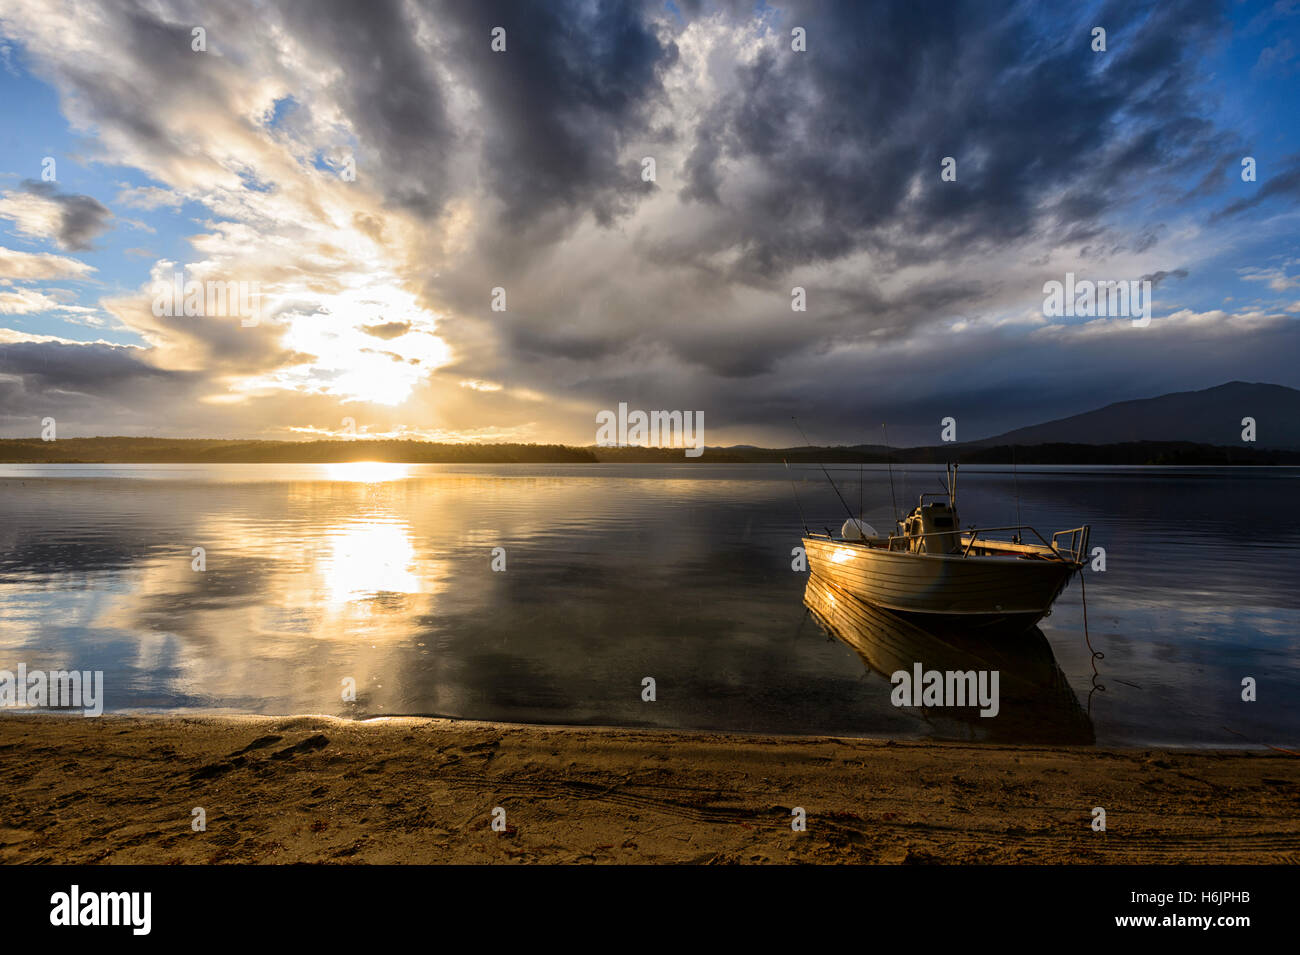 Sunset and threatening clouds over Wallaga Lake, near Bermagui, South Coast, New South Wales, Australia Stock Photo